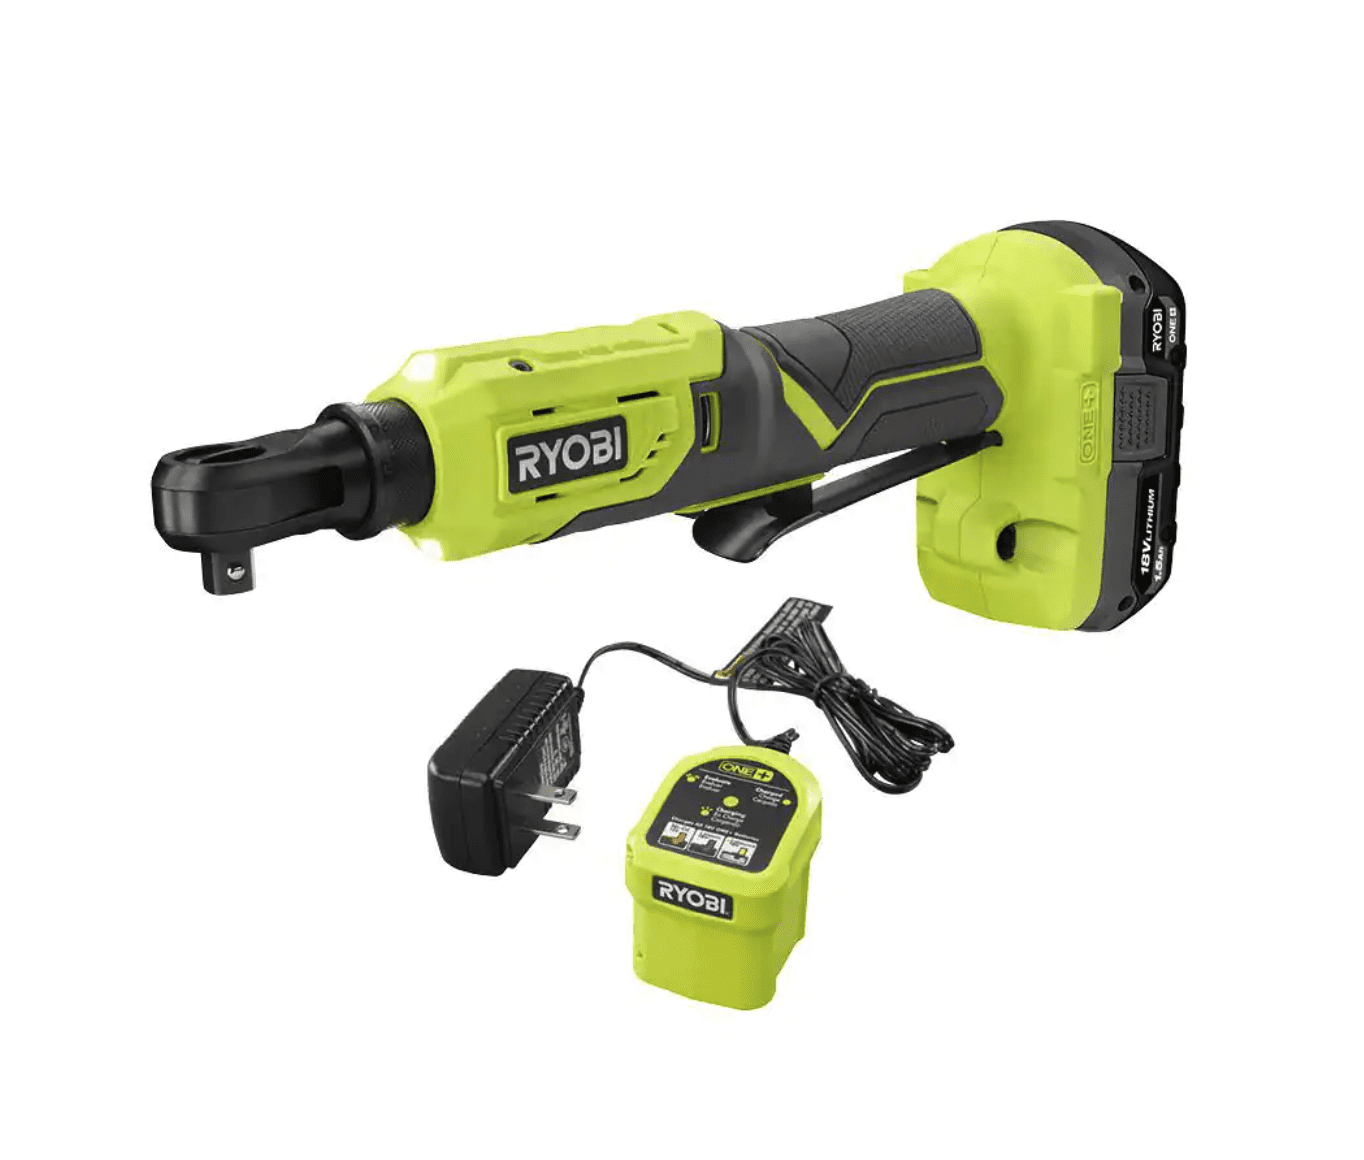 RYOBI 18V Cordless 3/8 in. 4-Postion Ratchet with 1.5 Ah Battery Charger - Walmart.com